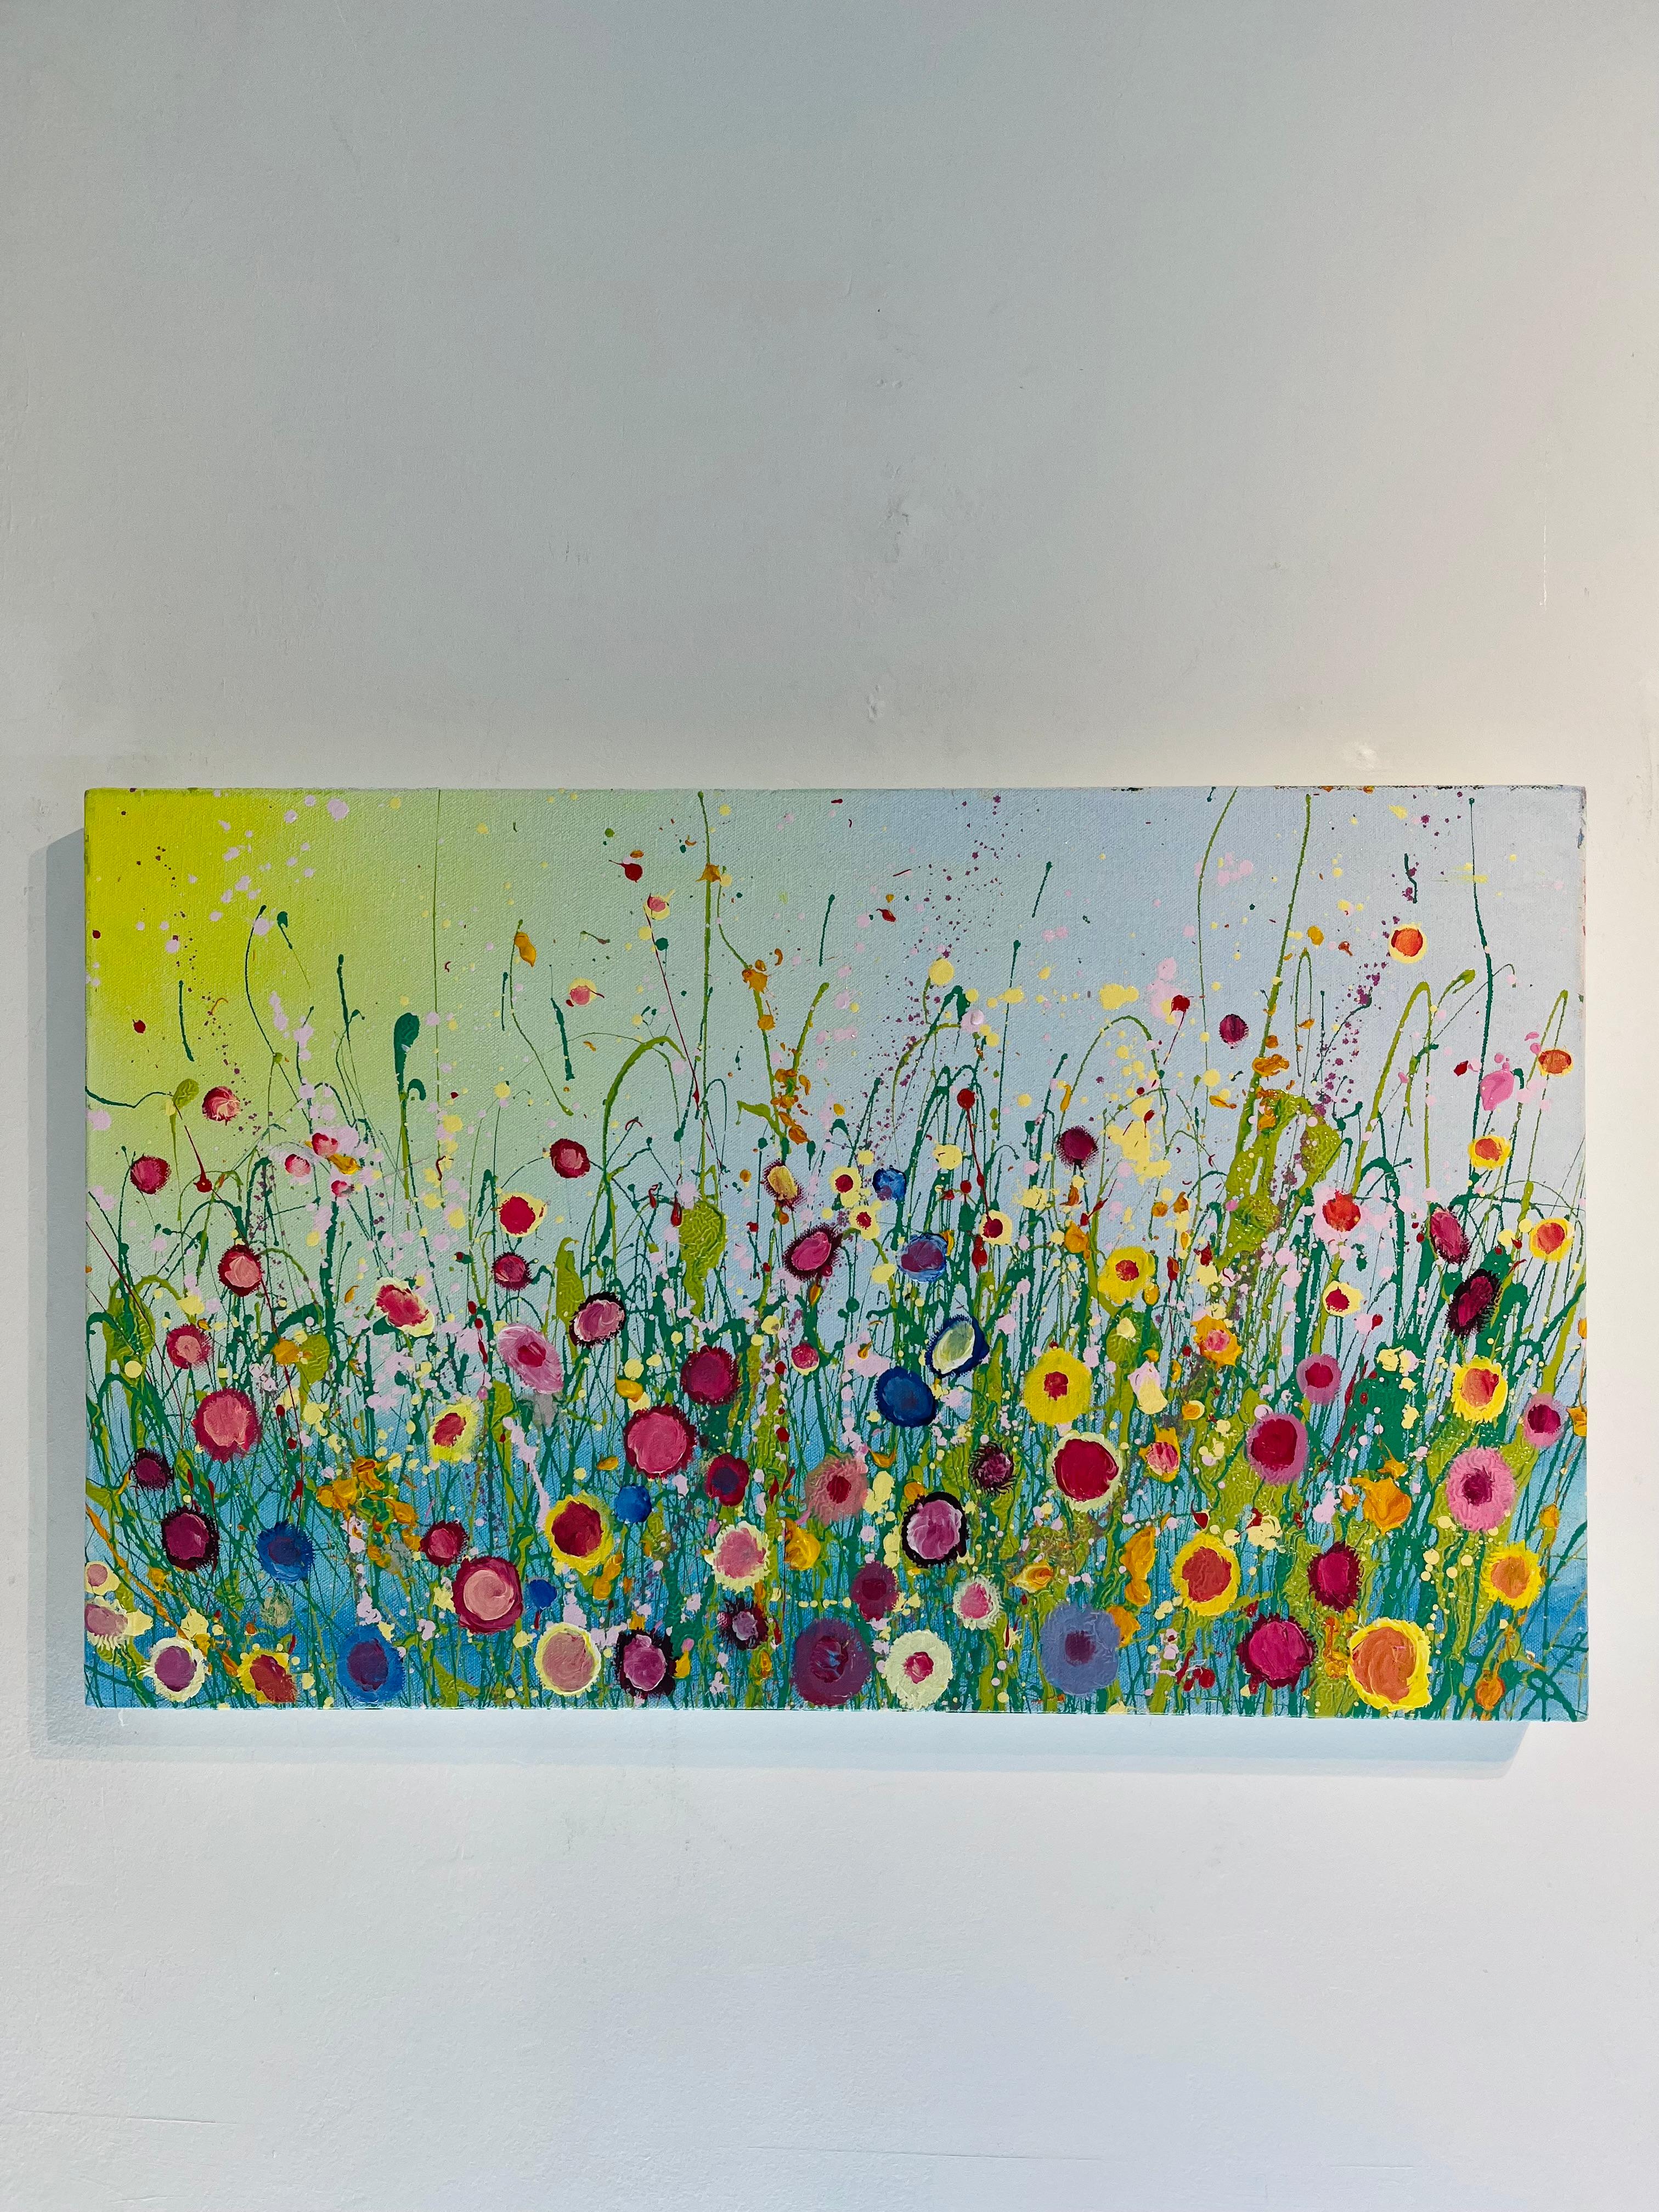 Rainbows of Love-original floral abstract landscape painting-contemporary Art - Abstract Painting by Yvonne Coomber